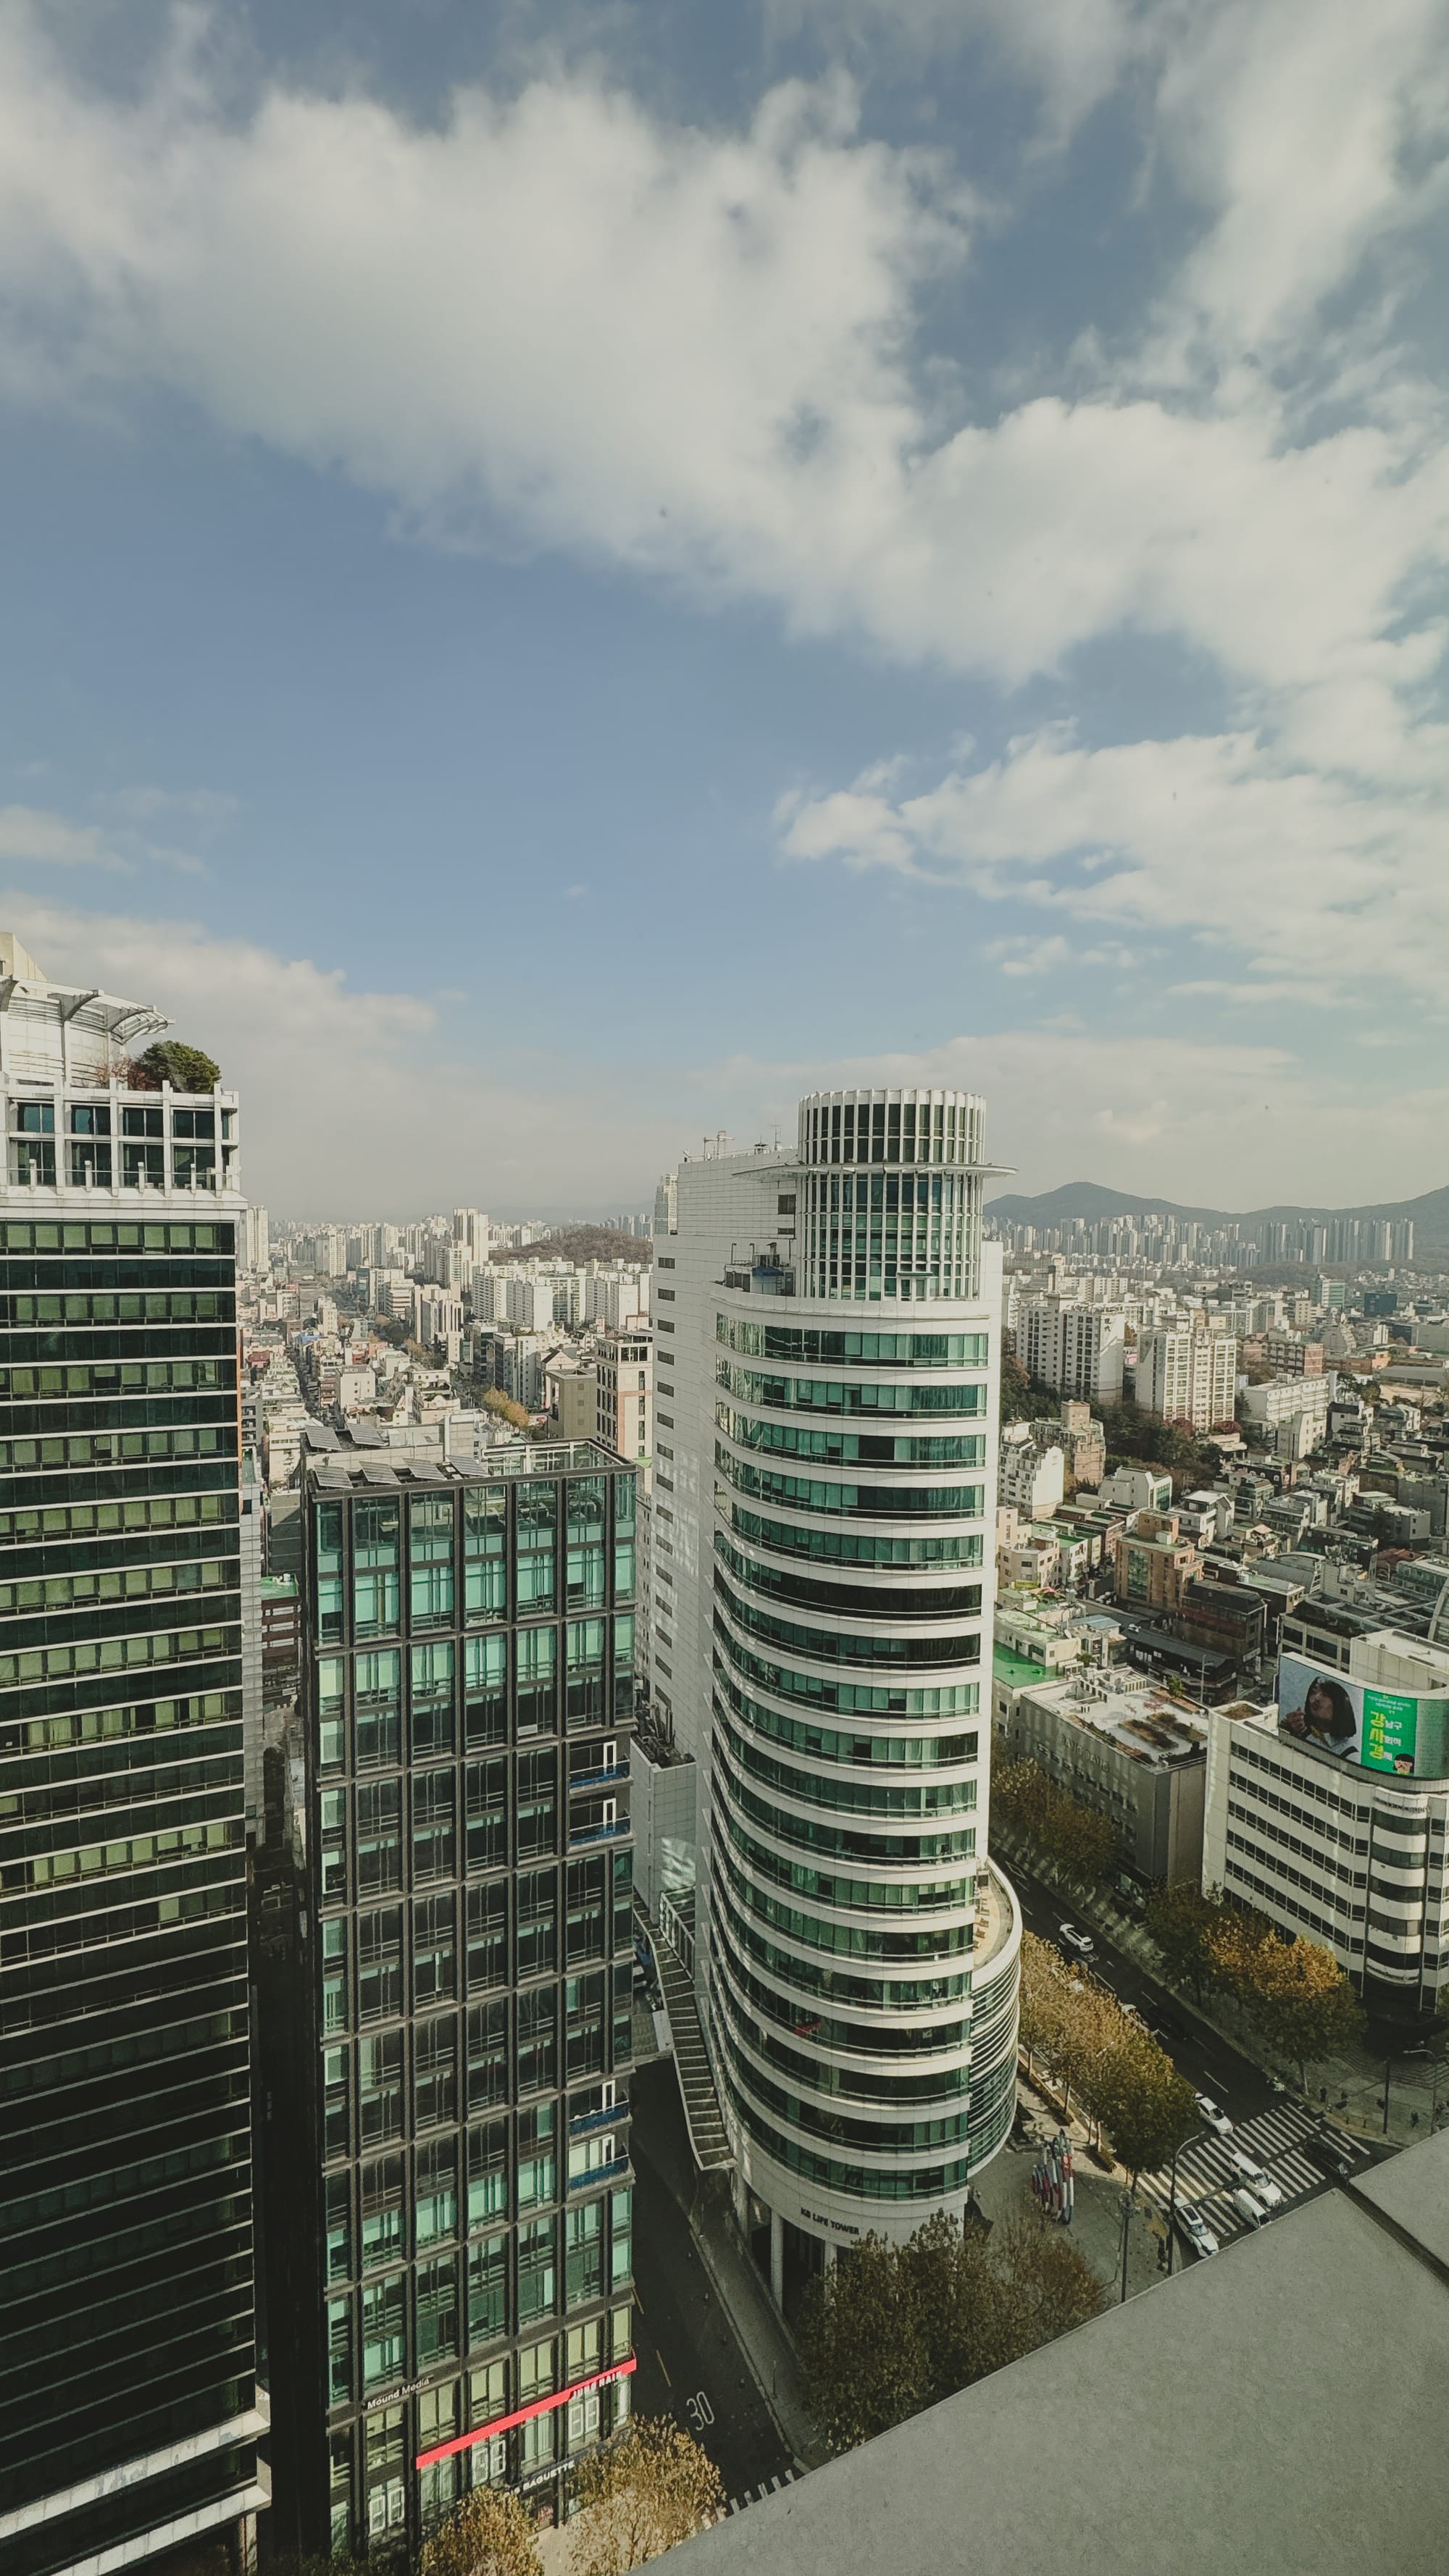 Seoul Housing 101: Where to Rent and How to Navigate the Market